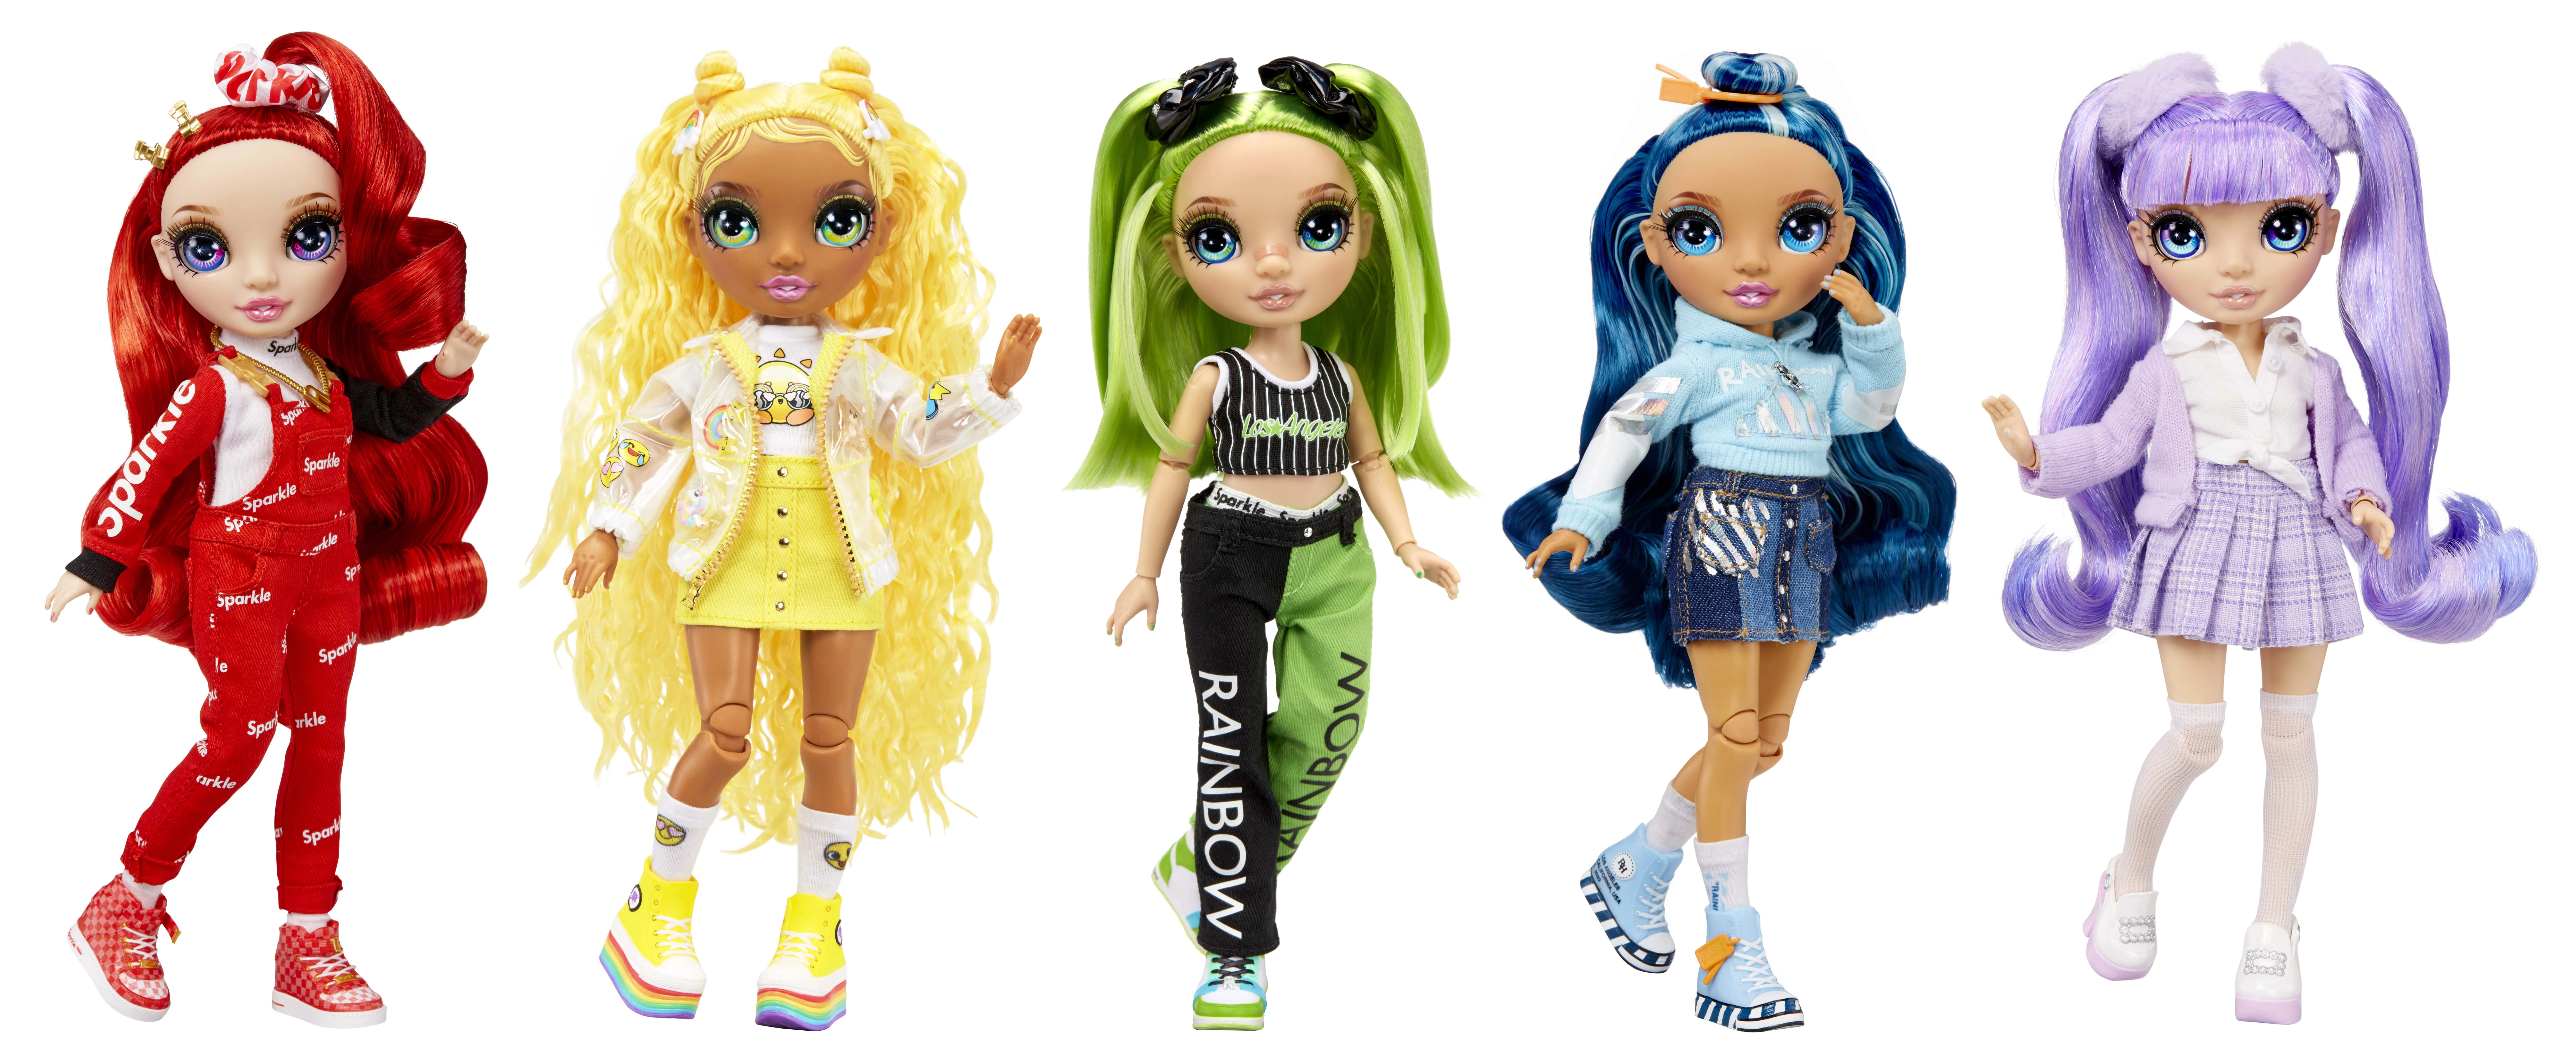 Rainbow High Exclusive with 5 Jr High Fashion Doll Favorites Ages 4 & up | Walmart (US)